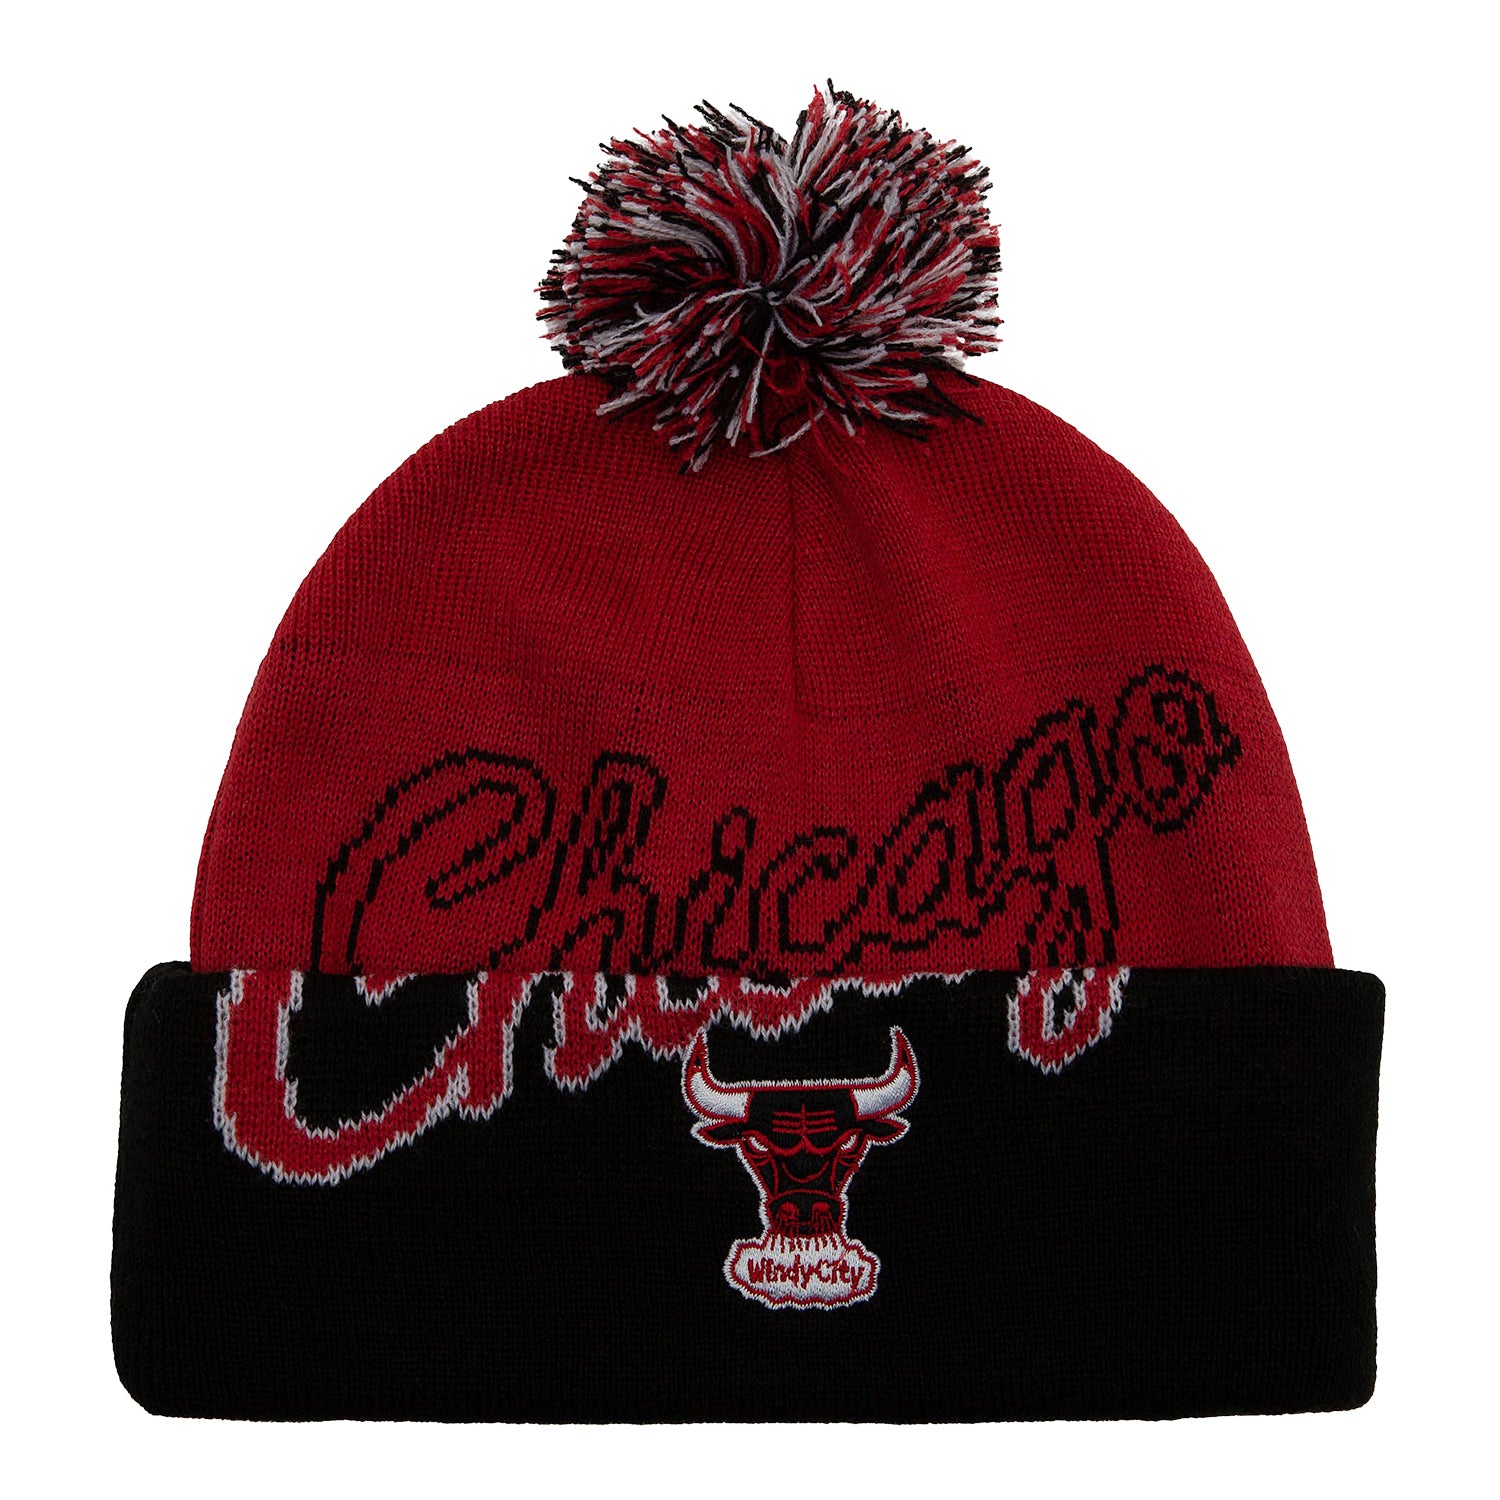 Chicago Bulls M&N Double Take Knit Hat in black and red - front view